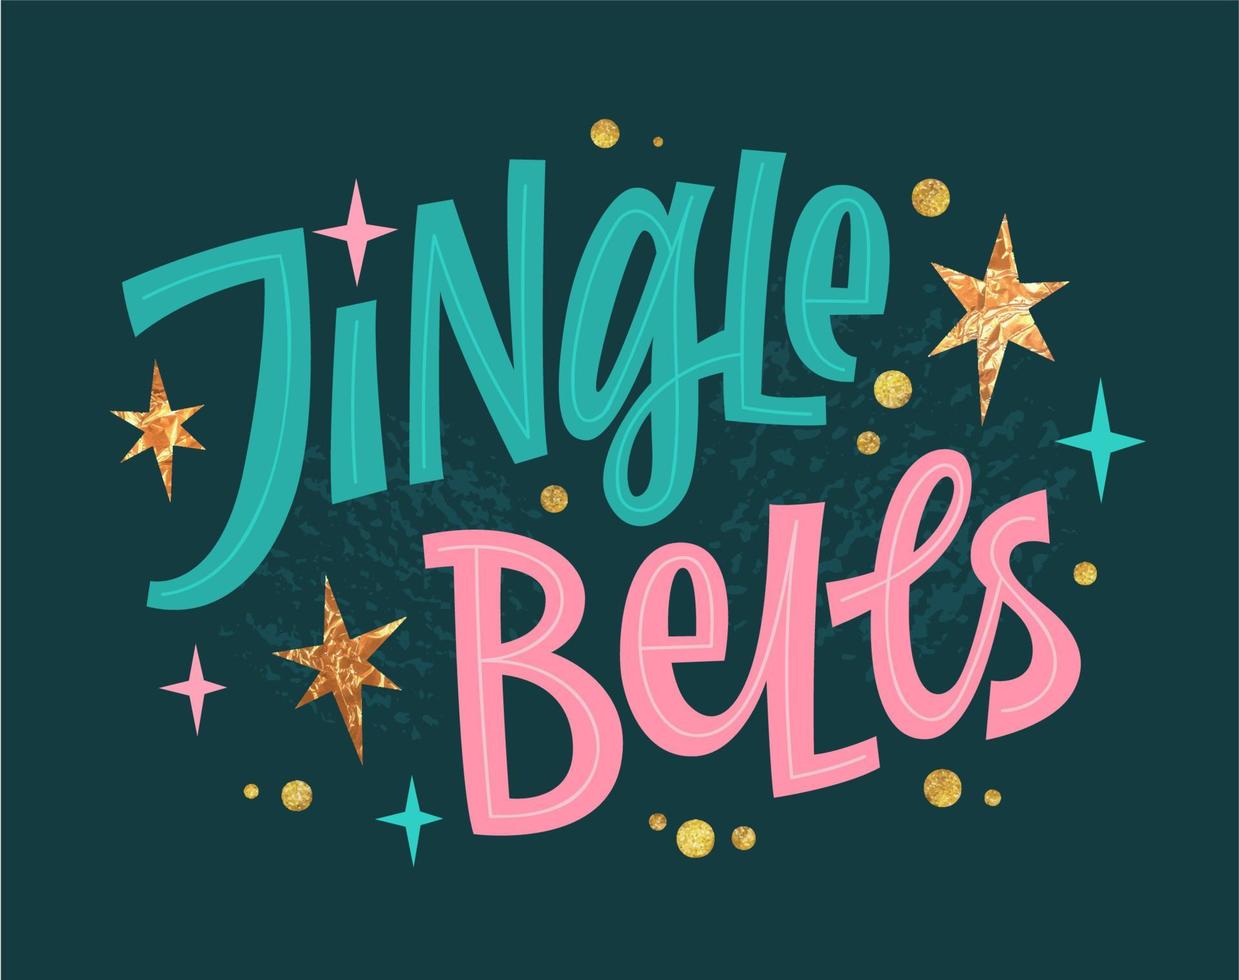 Modern script lettering design in trendy pink, cold green, gold colors, Jingle Bells. Creative vector typography illustration for Christmas events purposes. Festive greetings template design